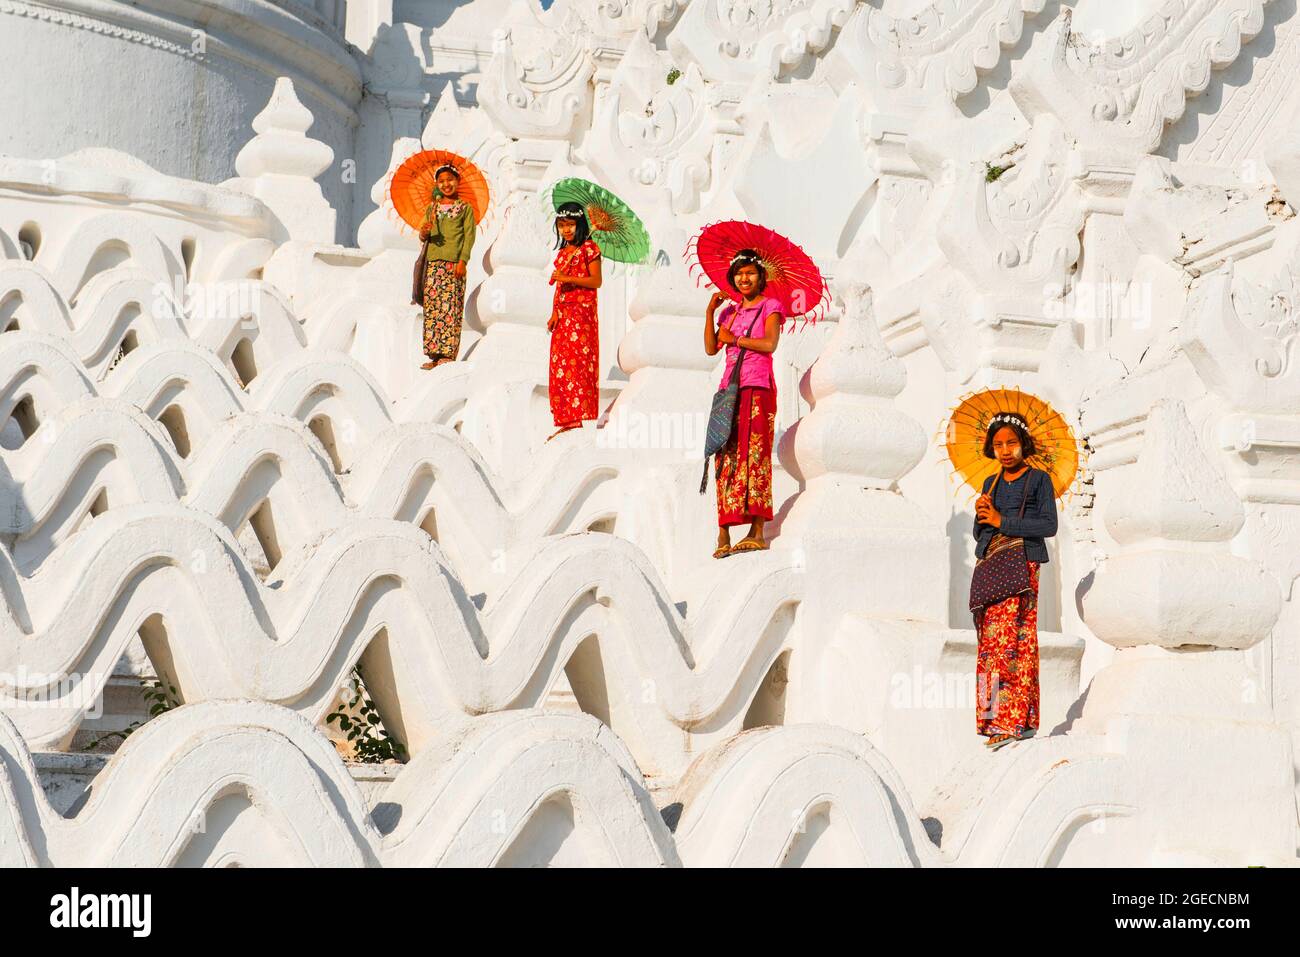 Local female worshipers with parasols ascending the hsinbyume pagoda, Mingun, Myanmar Stock Photo